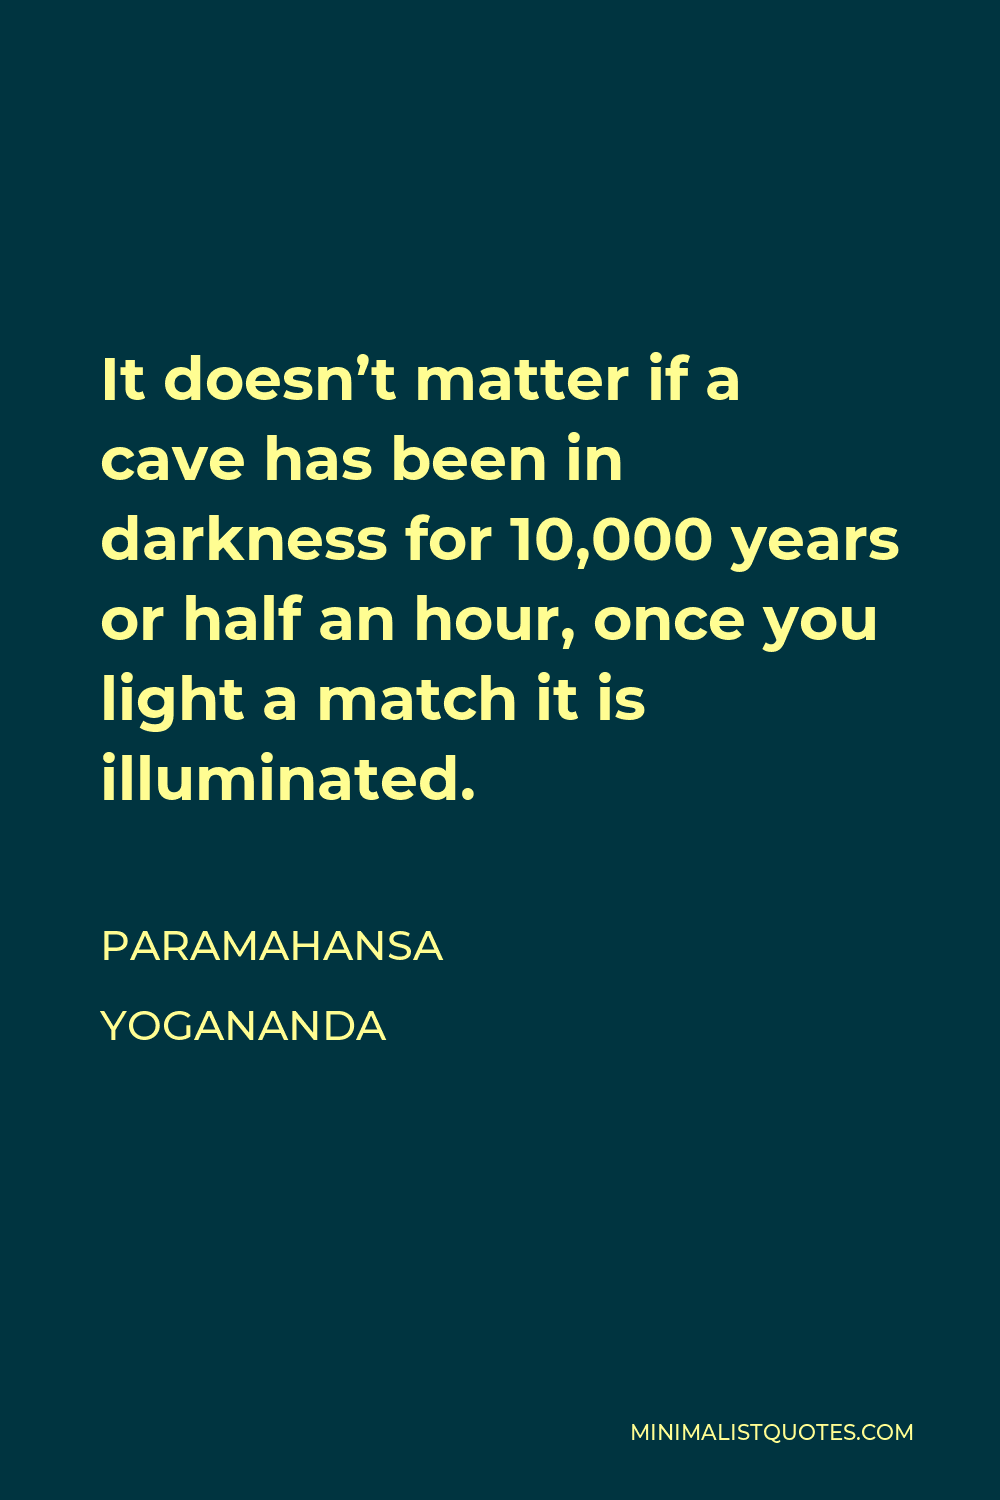 Paramahansa Yogananda Quote - It doesn’t matter if a cave has been in darkness for 10,000 years or half an hour, once you light a match it is illuminated.